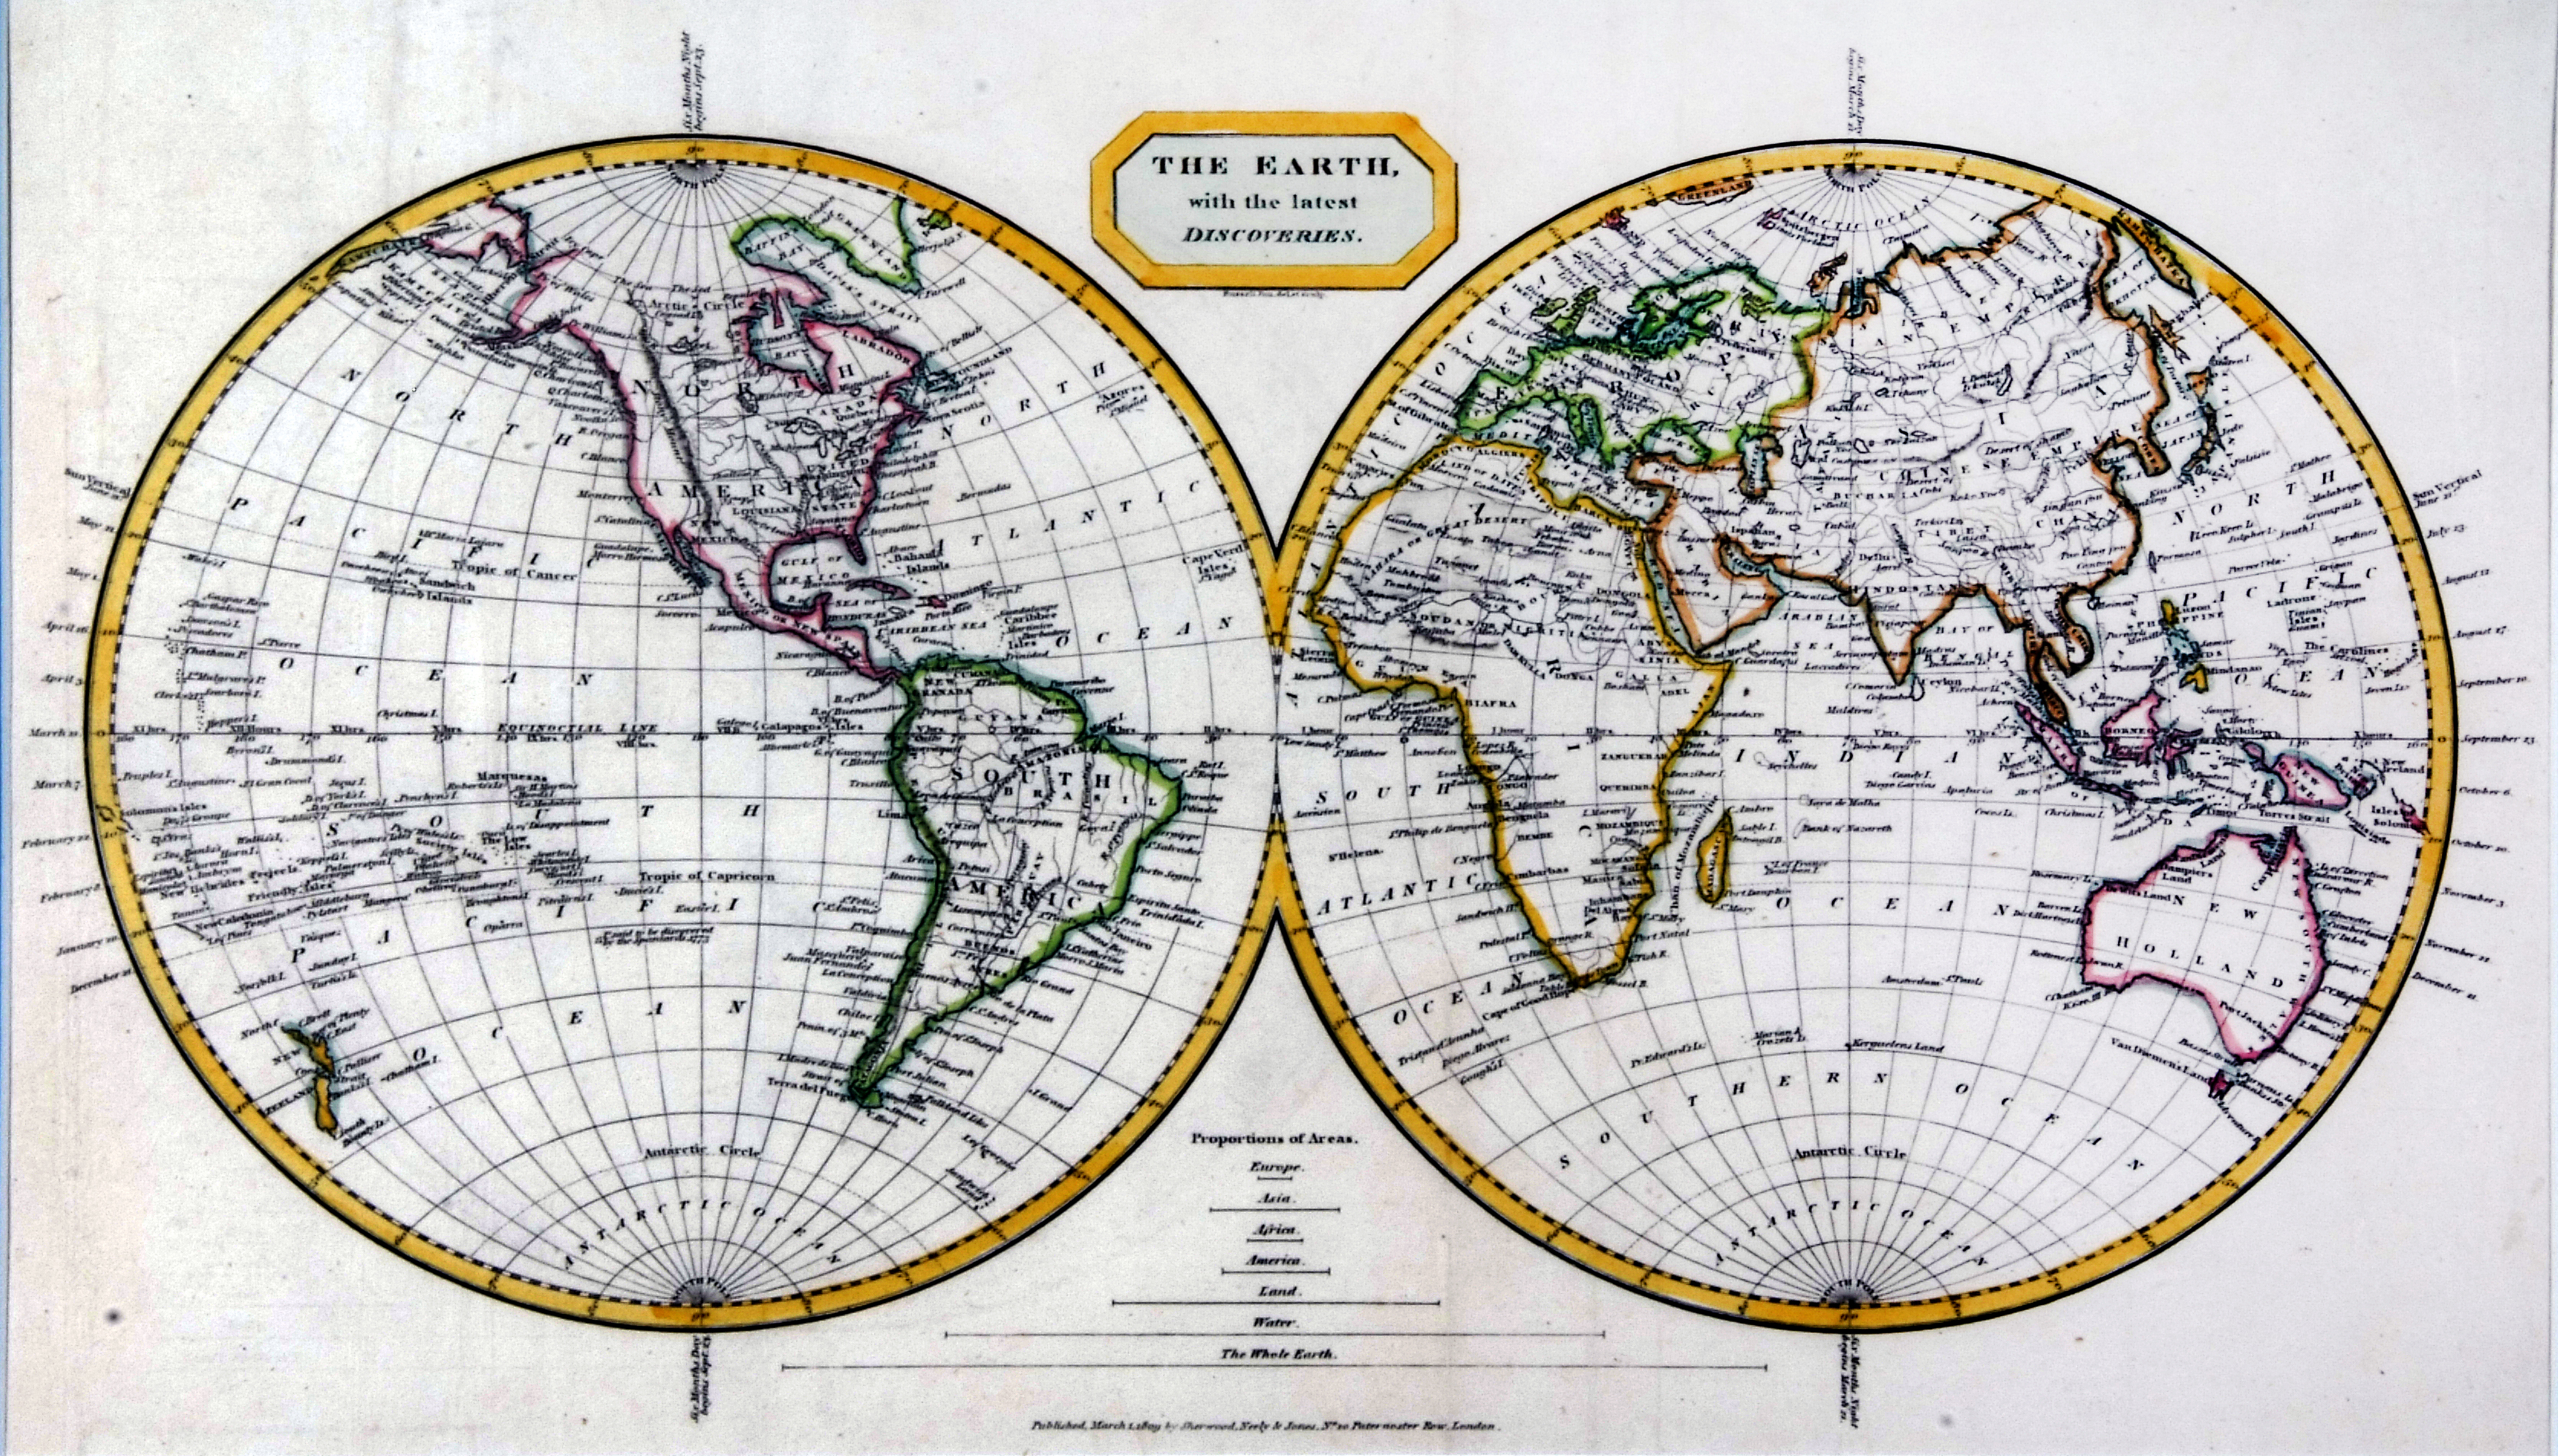 RUSSELL: THE EARTH WITH THE LATEST DISCOVERIES, engrd outline hand col'd map, 1809, approx 9 1/2"